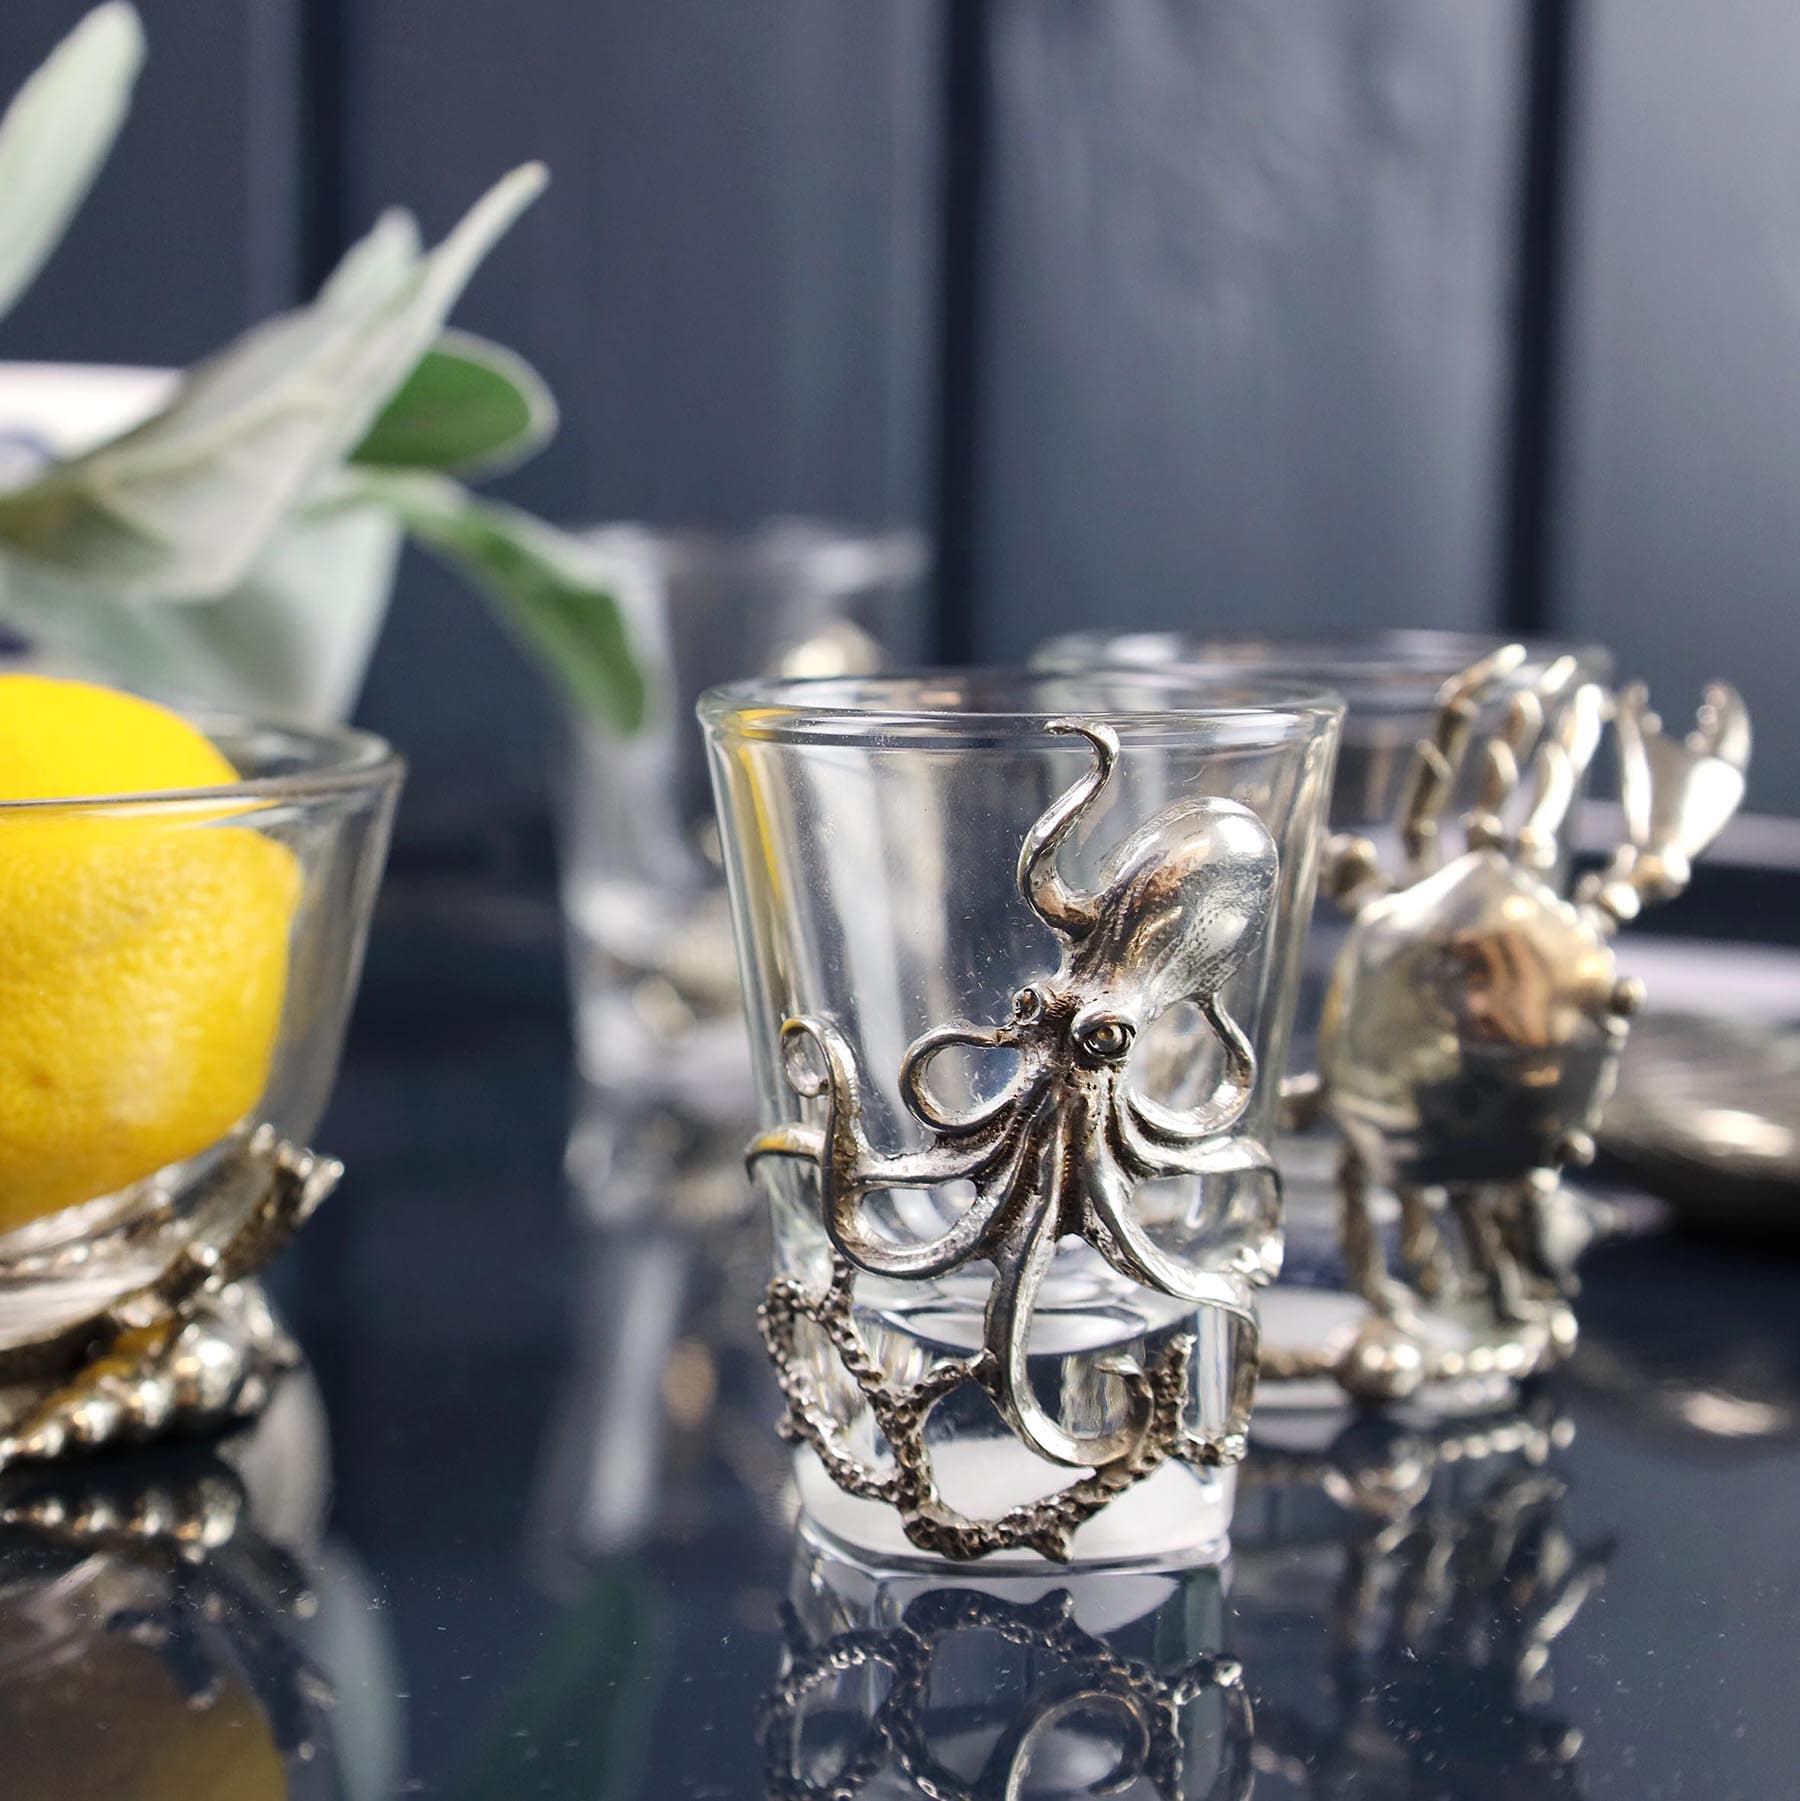 Pewter Octopus Shot Glass on a mirror table in front of a bowl with lemons in